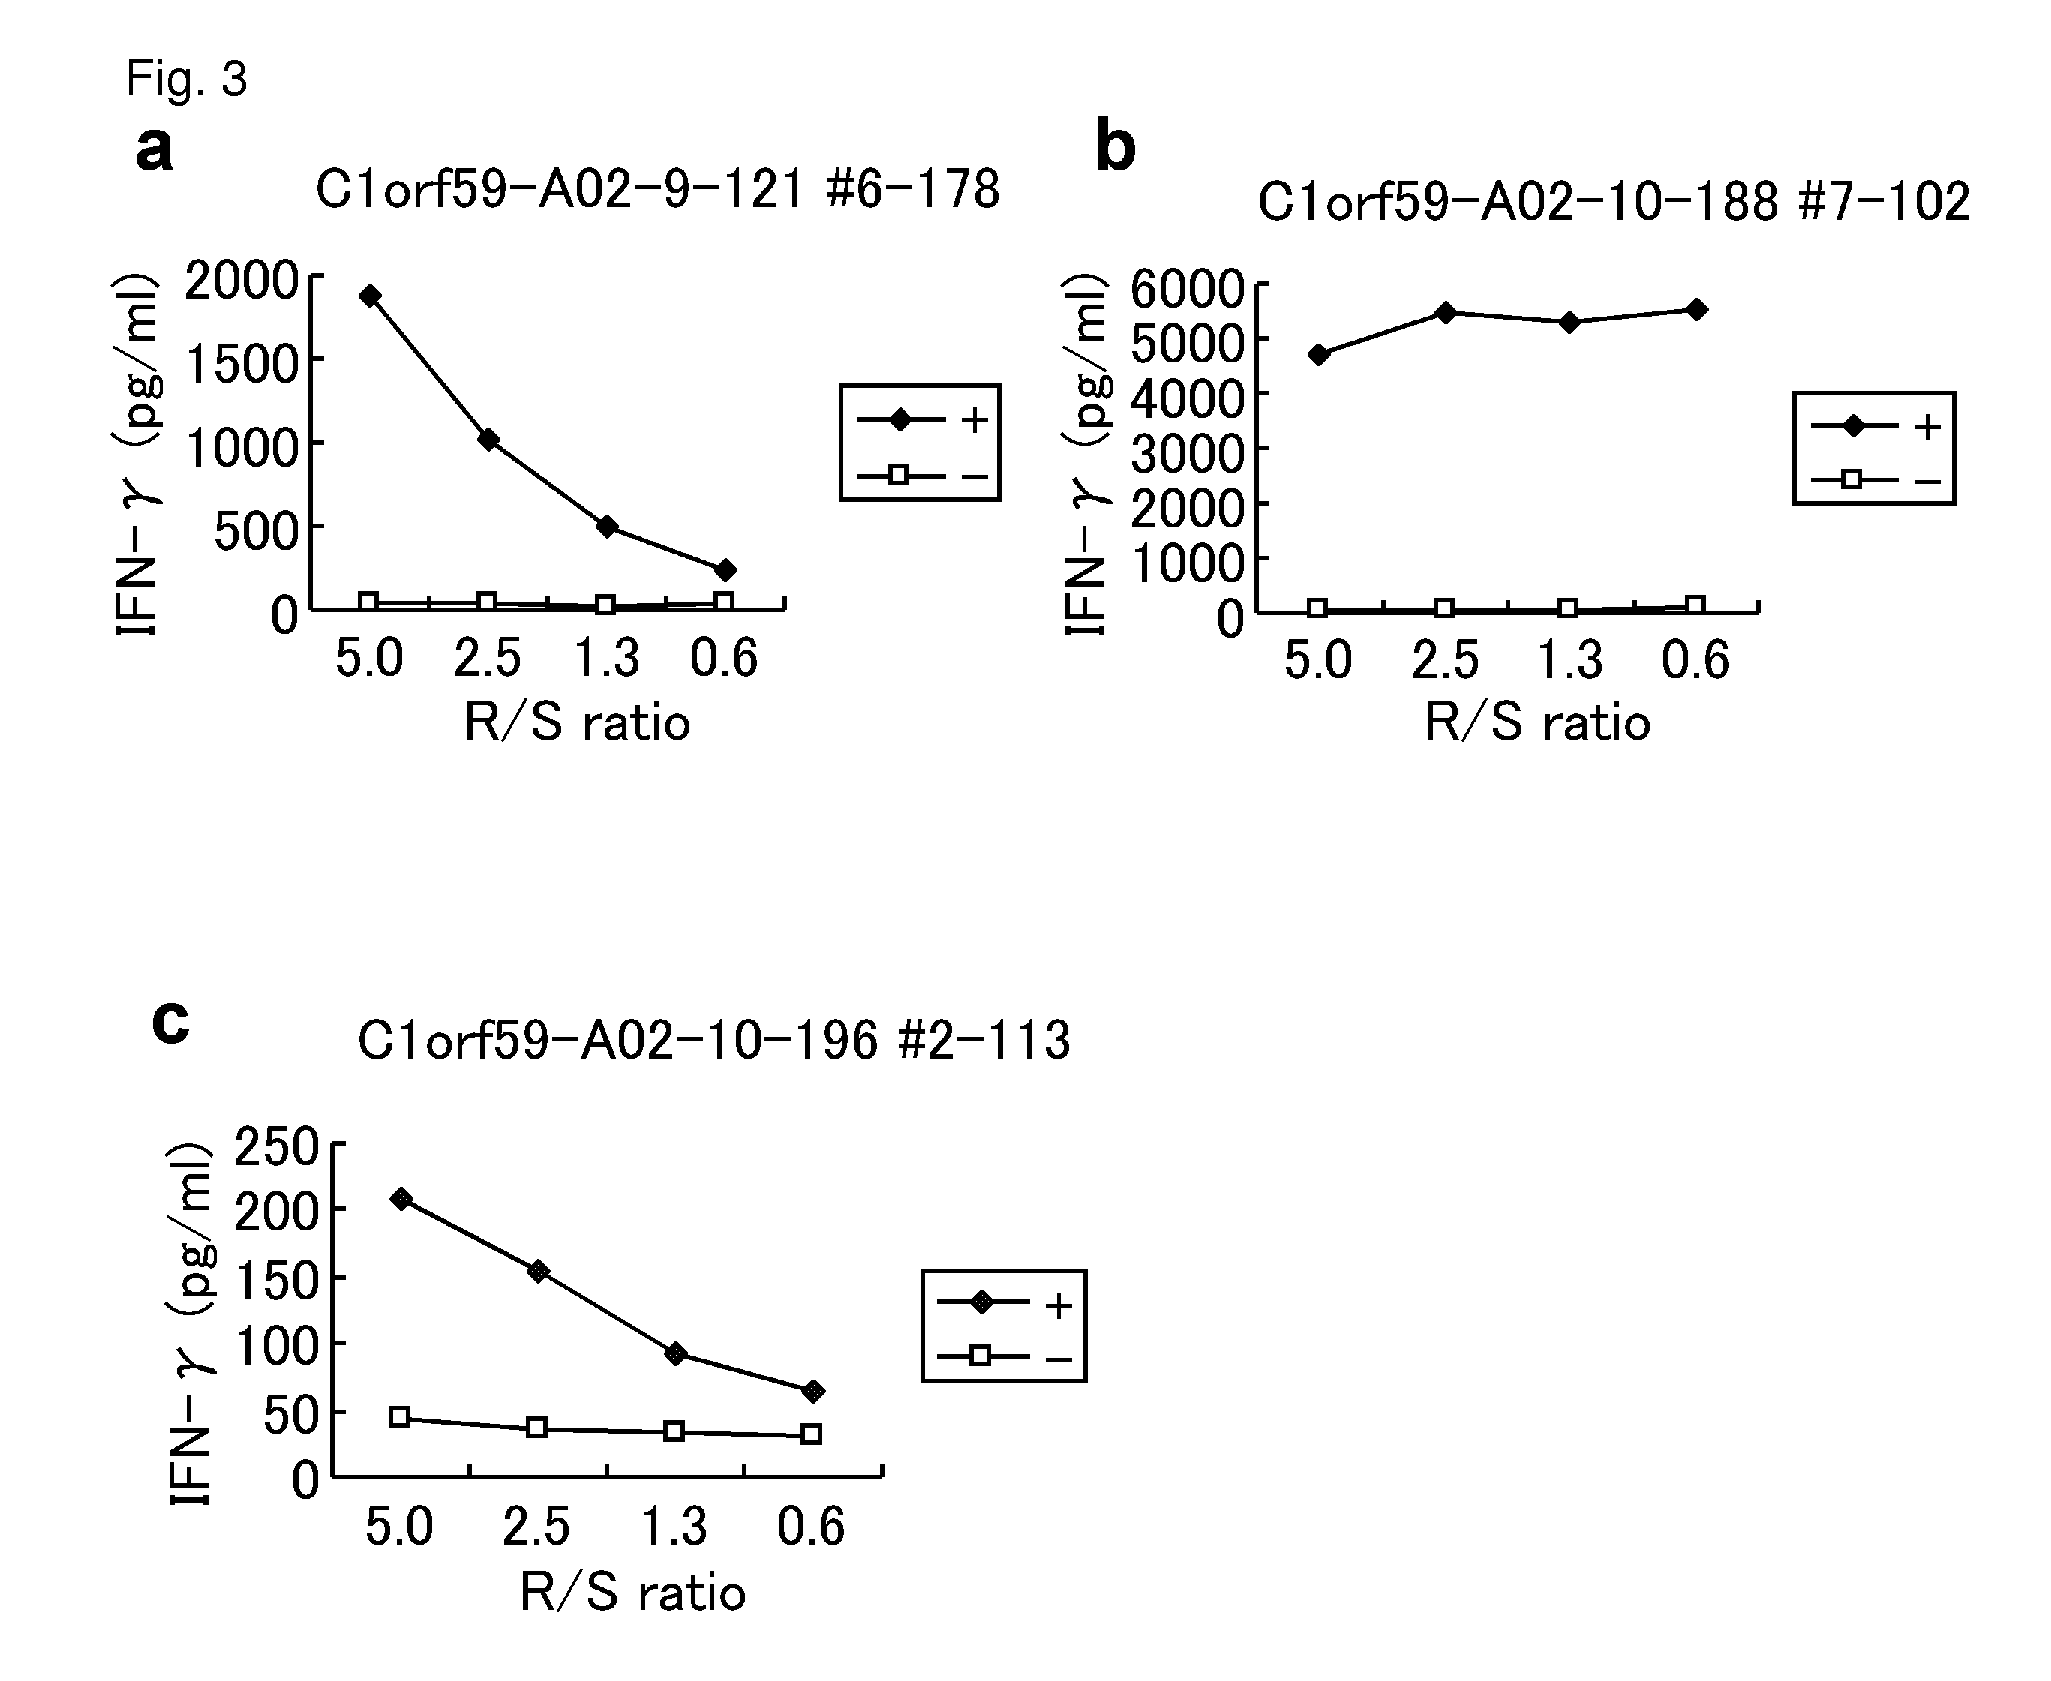 C1ORF59 peptides and vaccines including the same